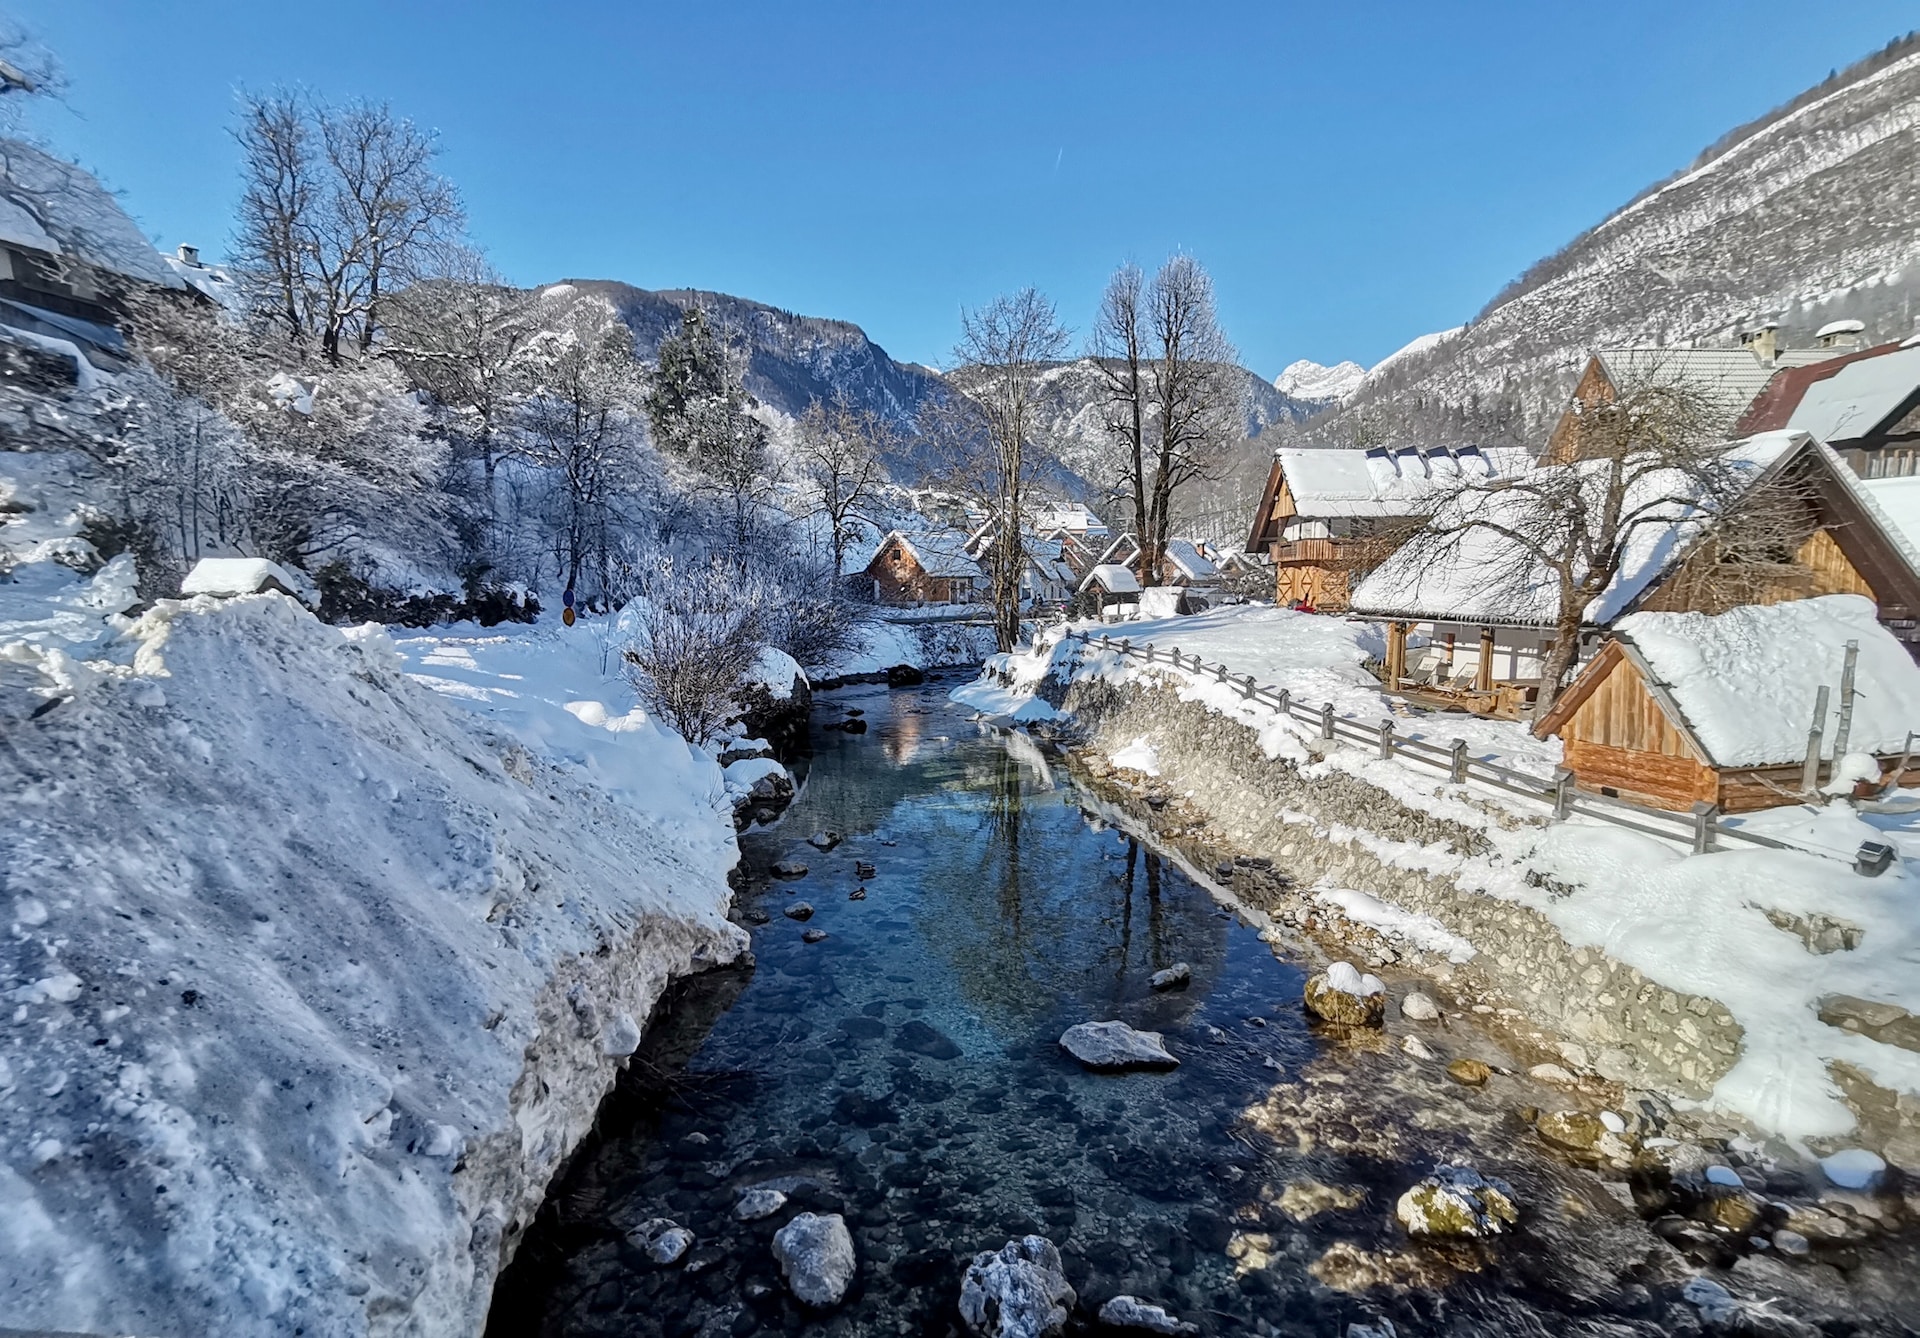 Christmas in Slovenia is a time to pass with your family and friends in the cozy mountainous regions.